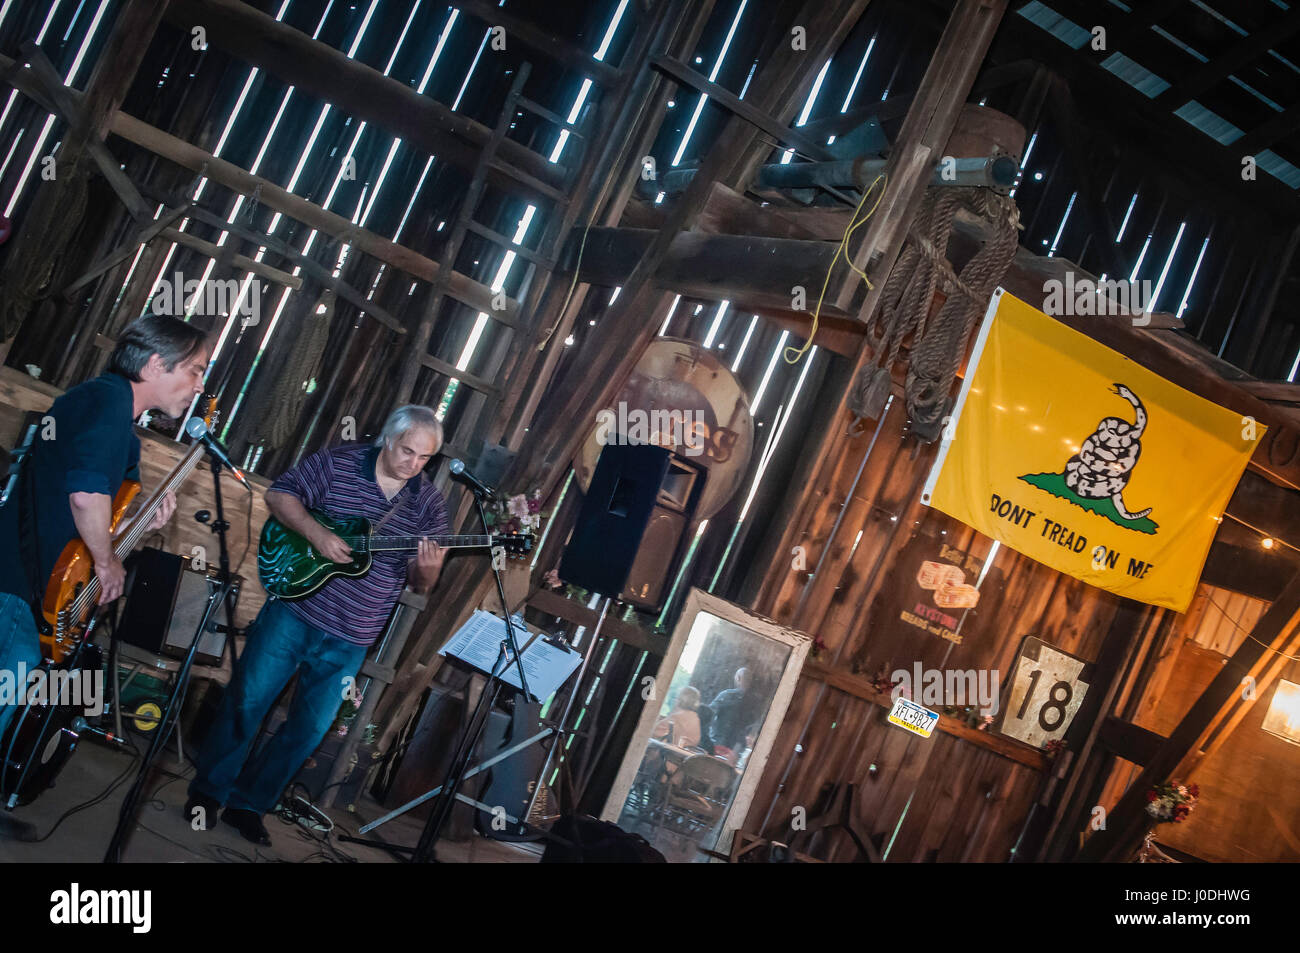 family party in old barn, Don't tread on me and American flags. Stock Photo